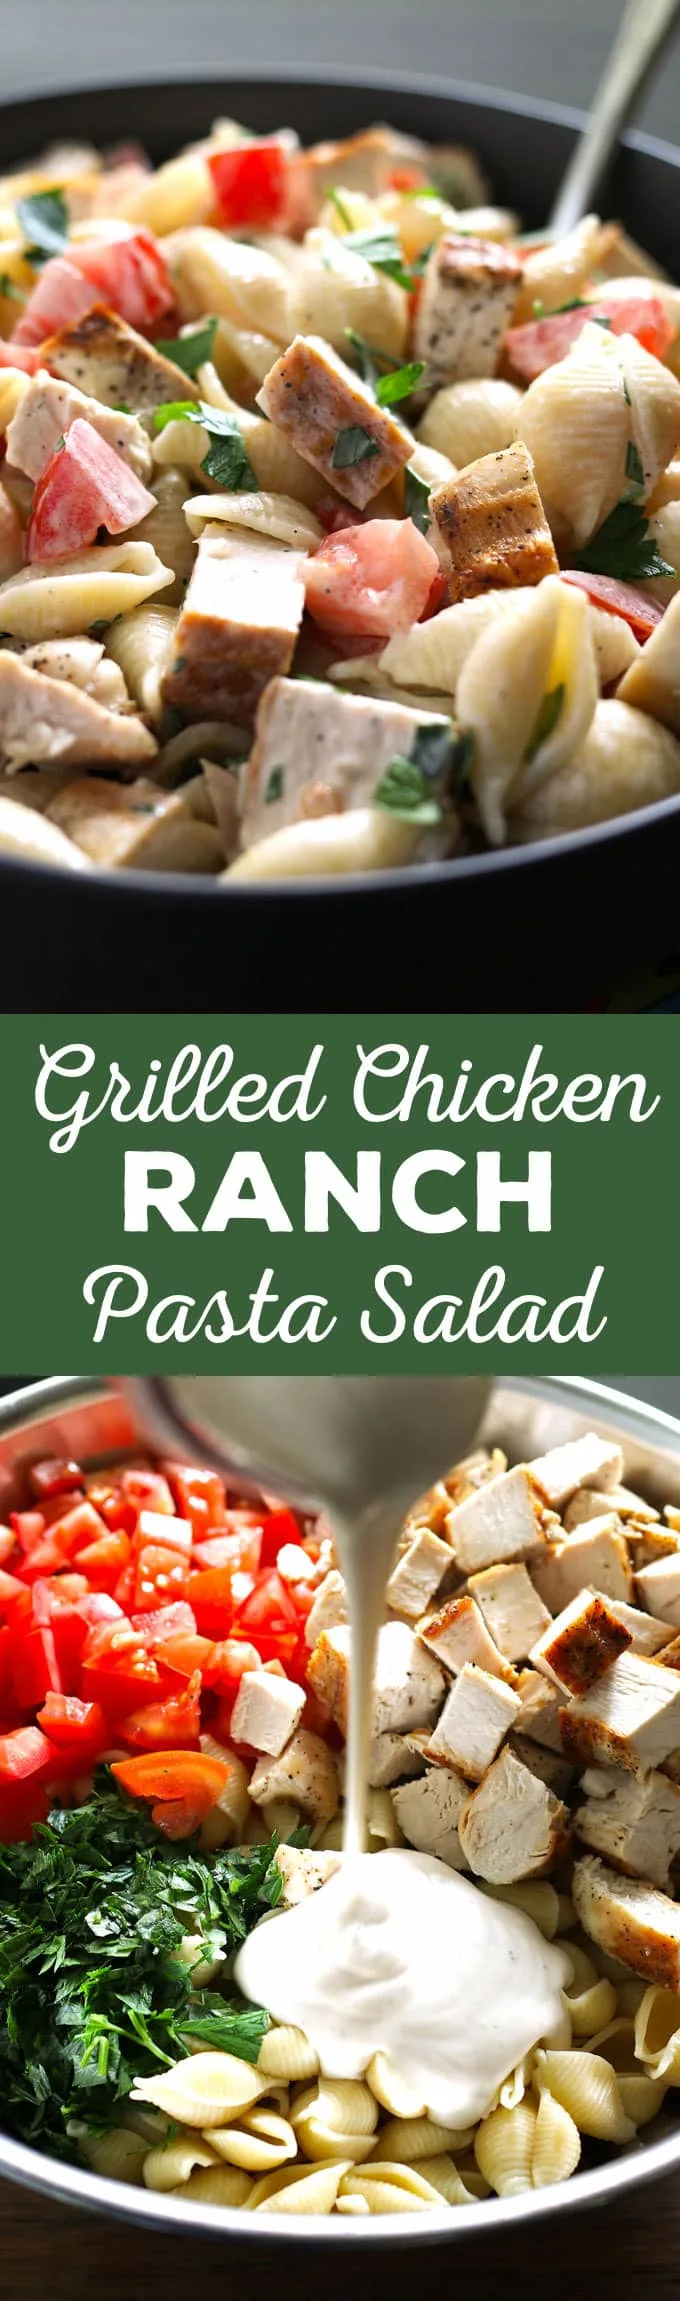 This grilled chicken ranch pasta salad is the perfect last minute side dish! It is perfect for parties and summer holidays like Memorial Day, the Fourth of July or Labor Day. | honeyandbirch.com